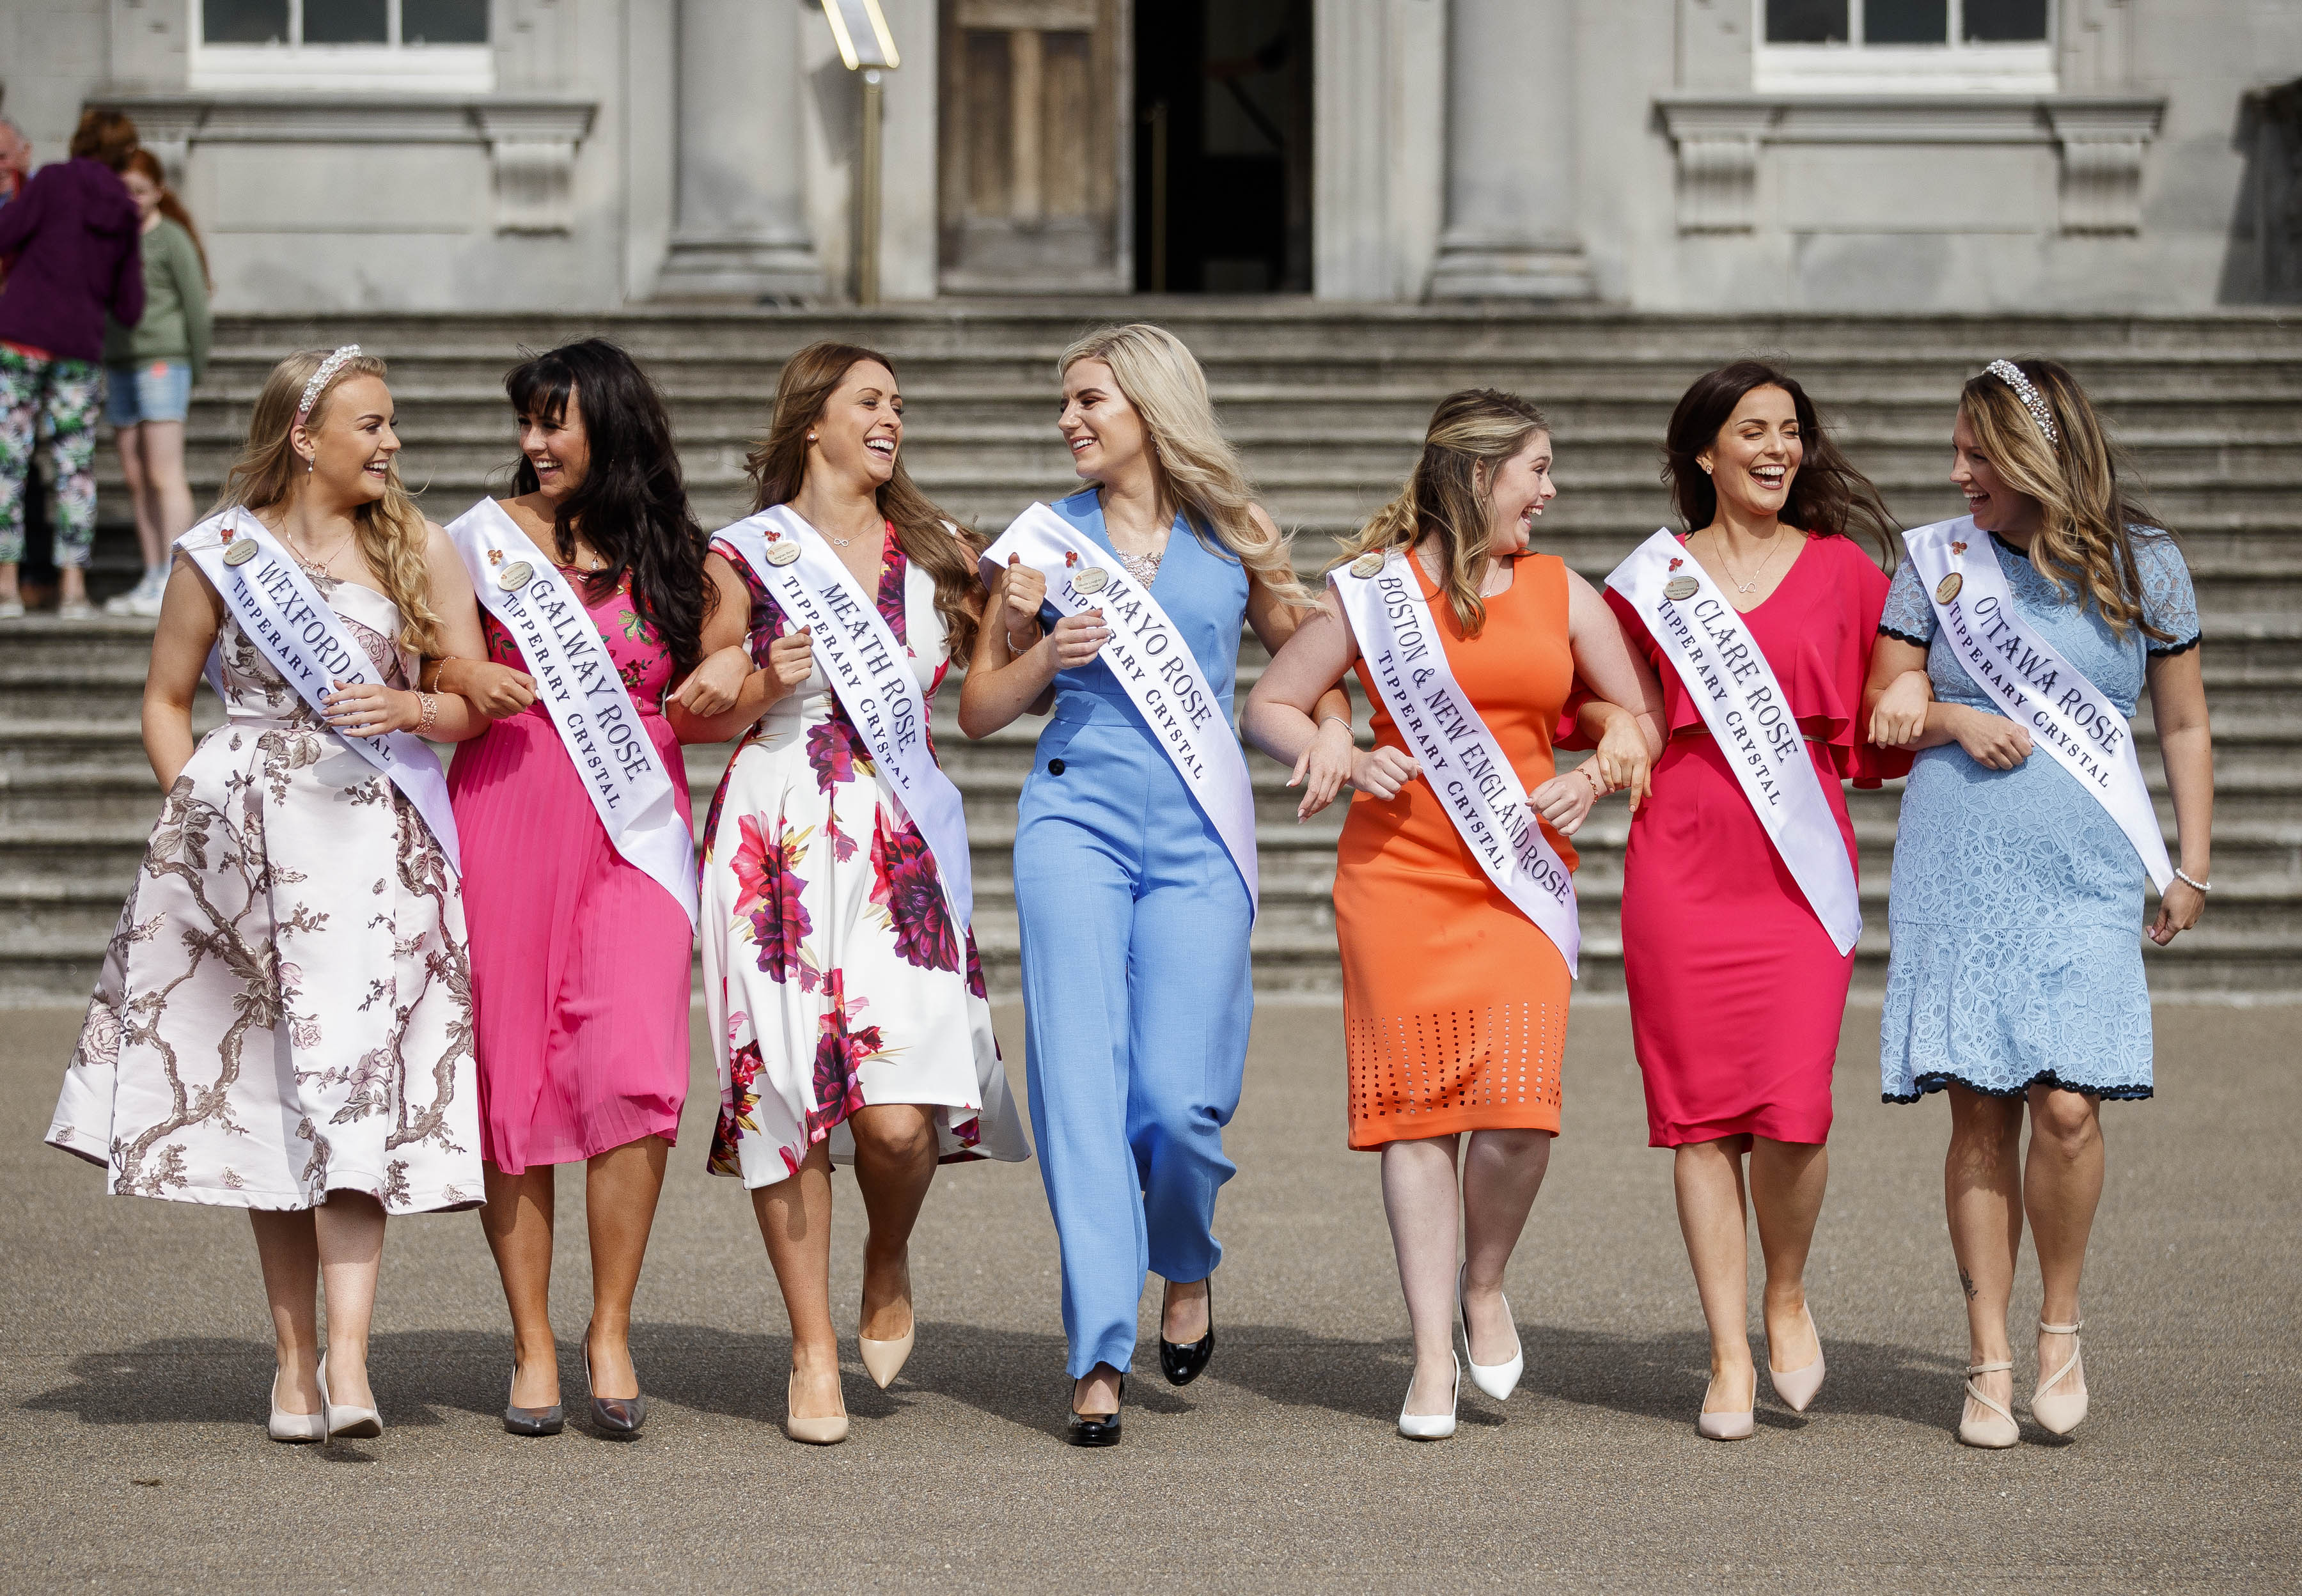 Meet the final contestants ahead of tonight's Rose of Tralee finale